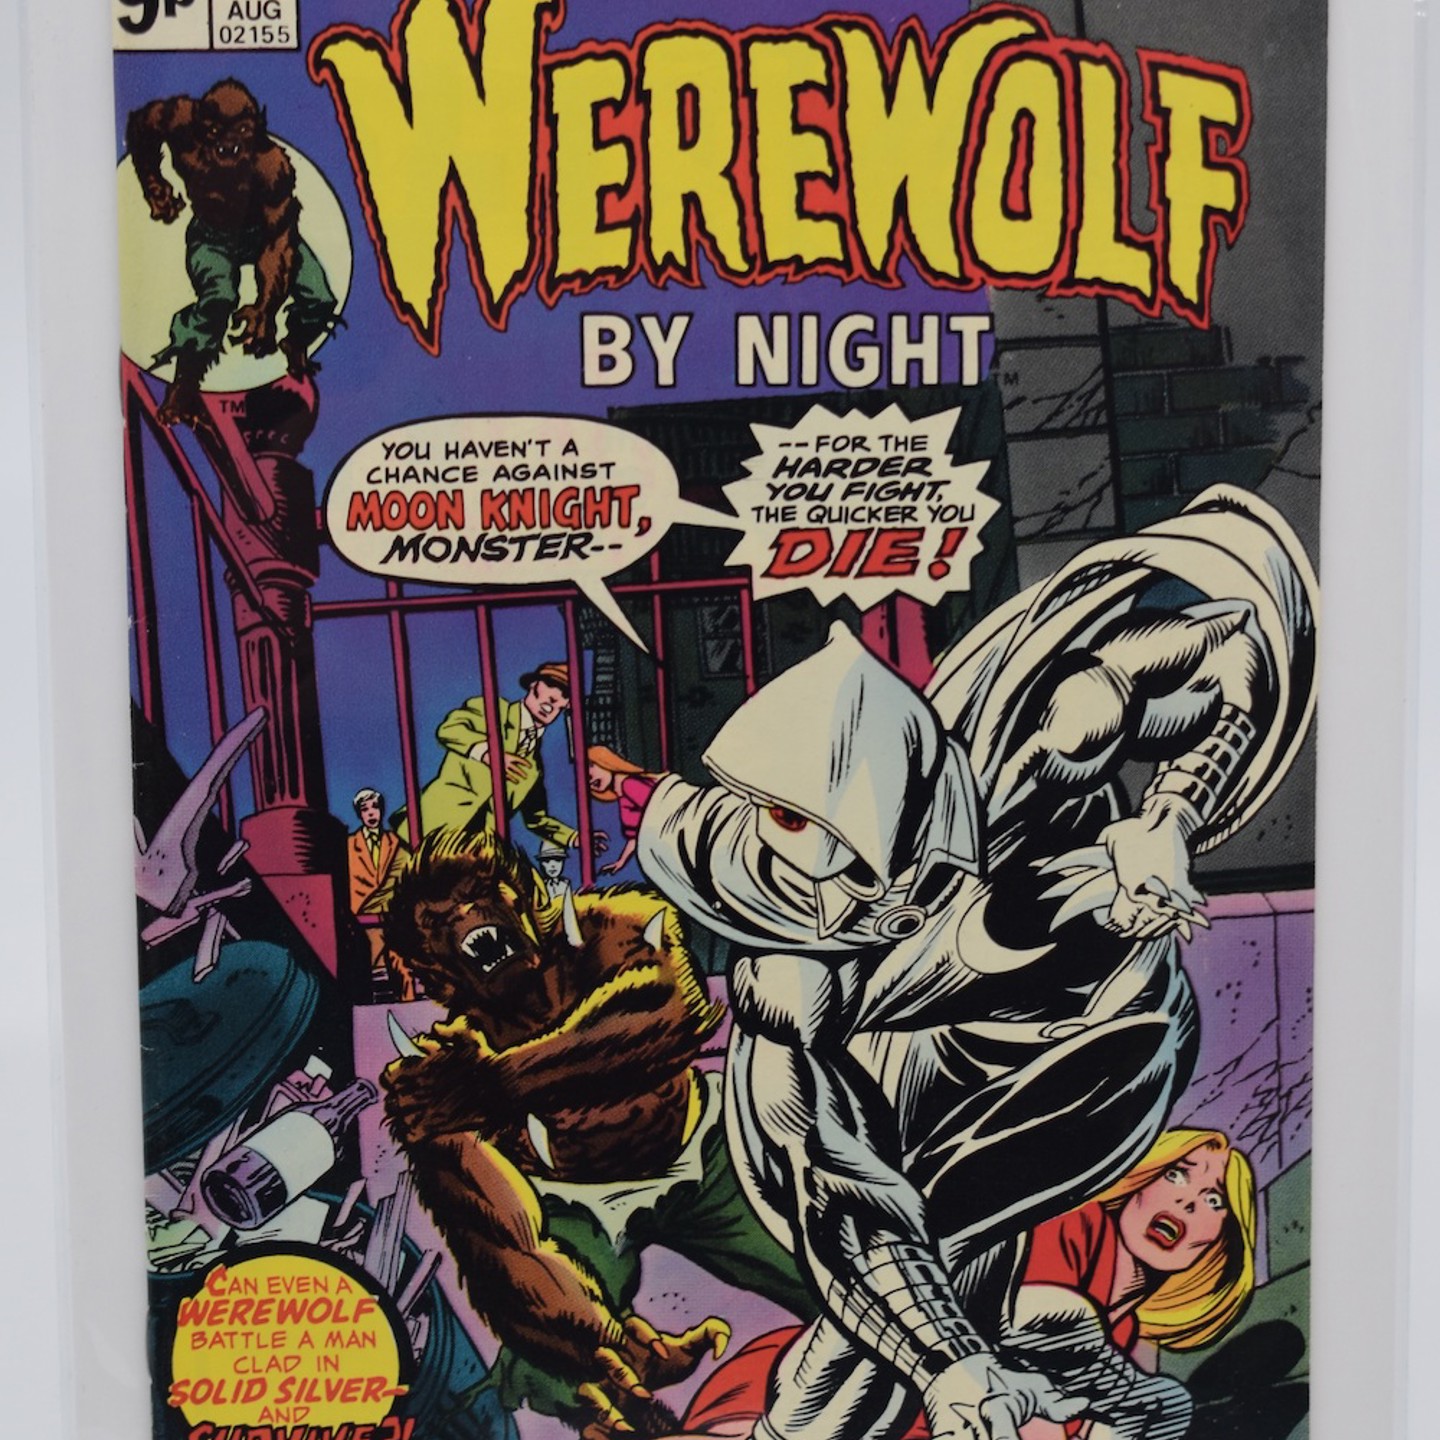 Werewolf By Night Issue #32 1St Appearance Of Moon Knight, Key Marvel Bronze Age Book, Aug 1975 HAMMER Ś1,400